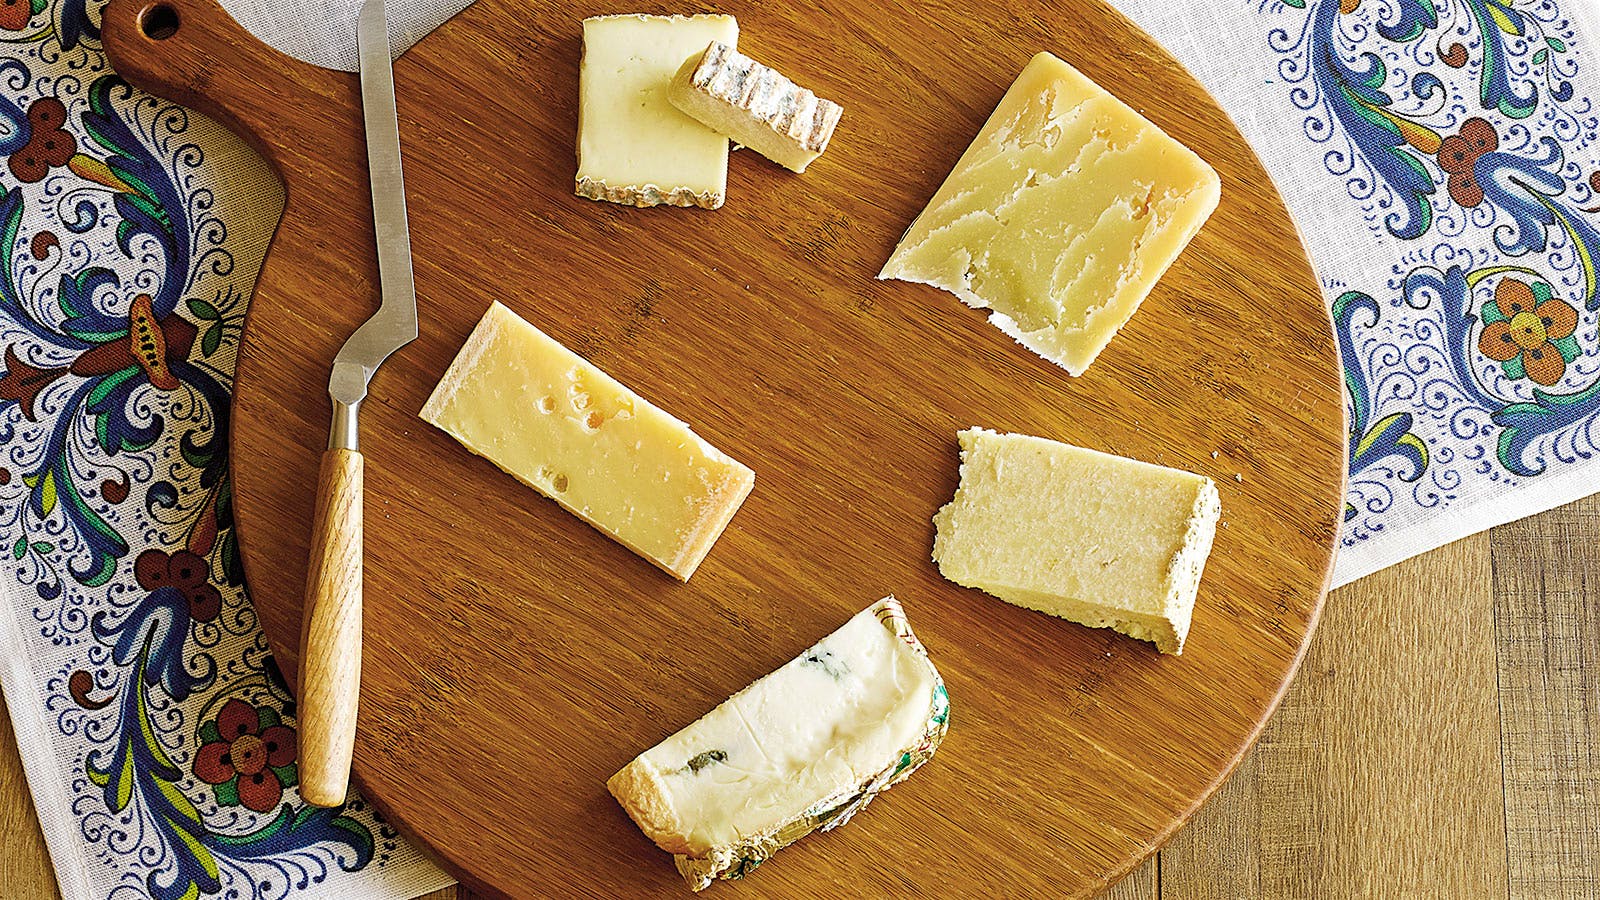 An All-Star Lineup of 8 Italian Cheeses